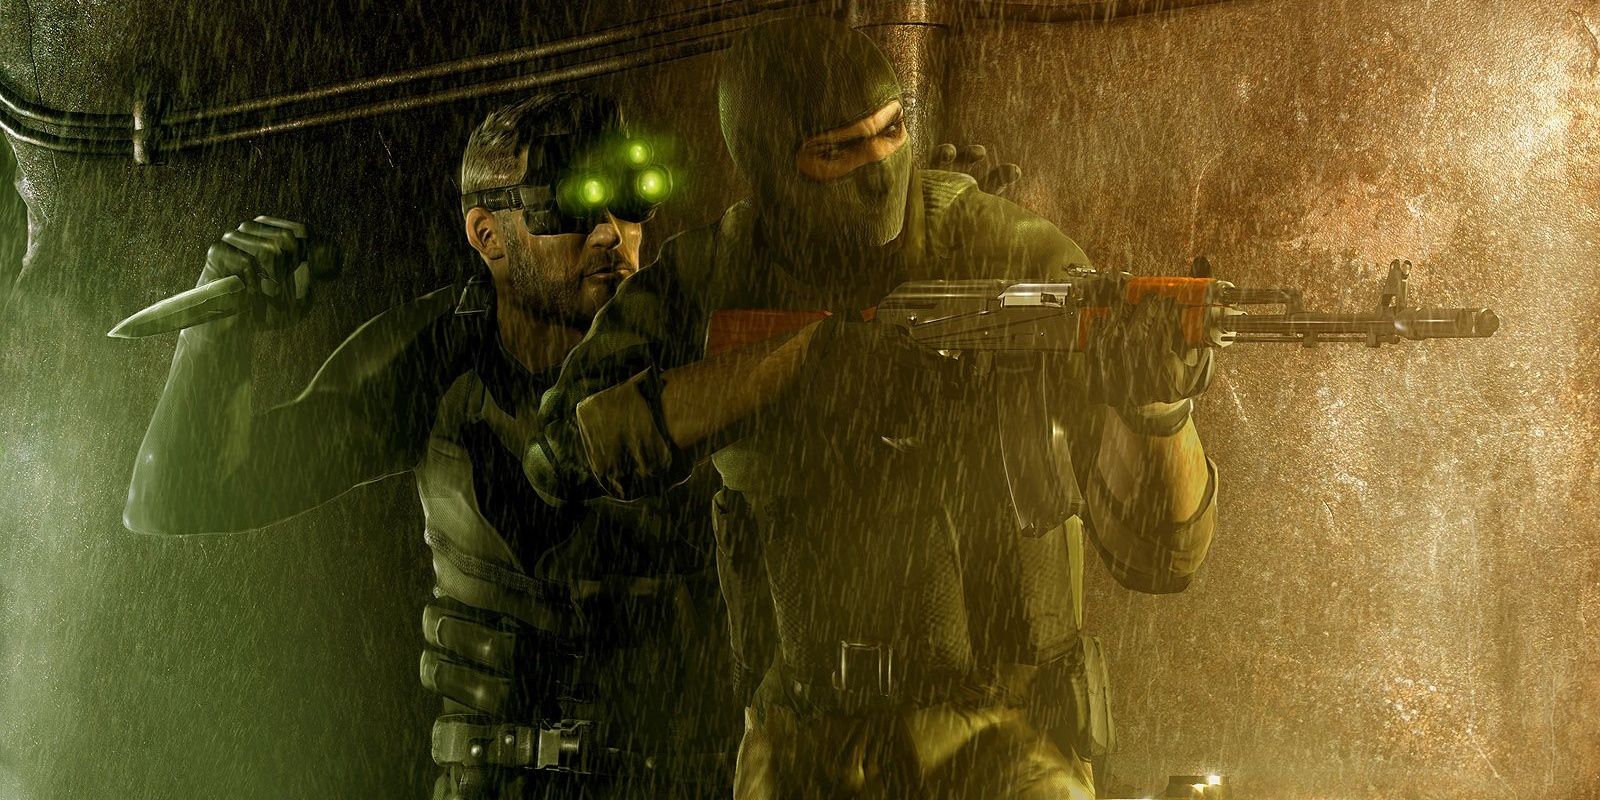 Sam Fisher sneaking up on a bad guy with a knife in Splinter Cell Chaos Theory